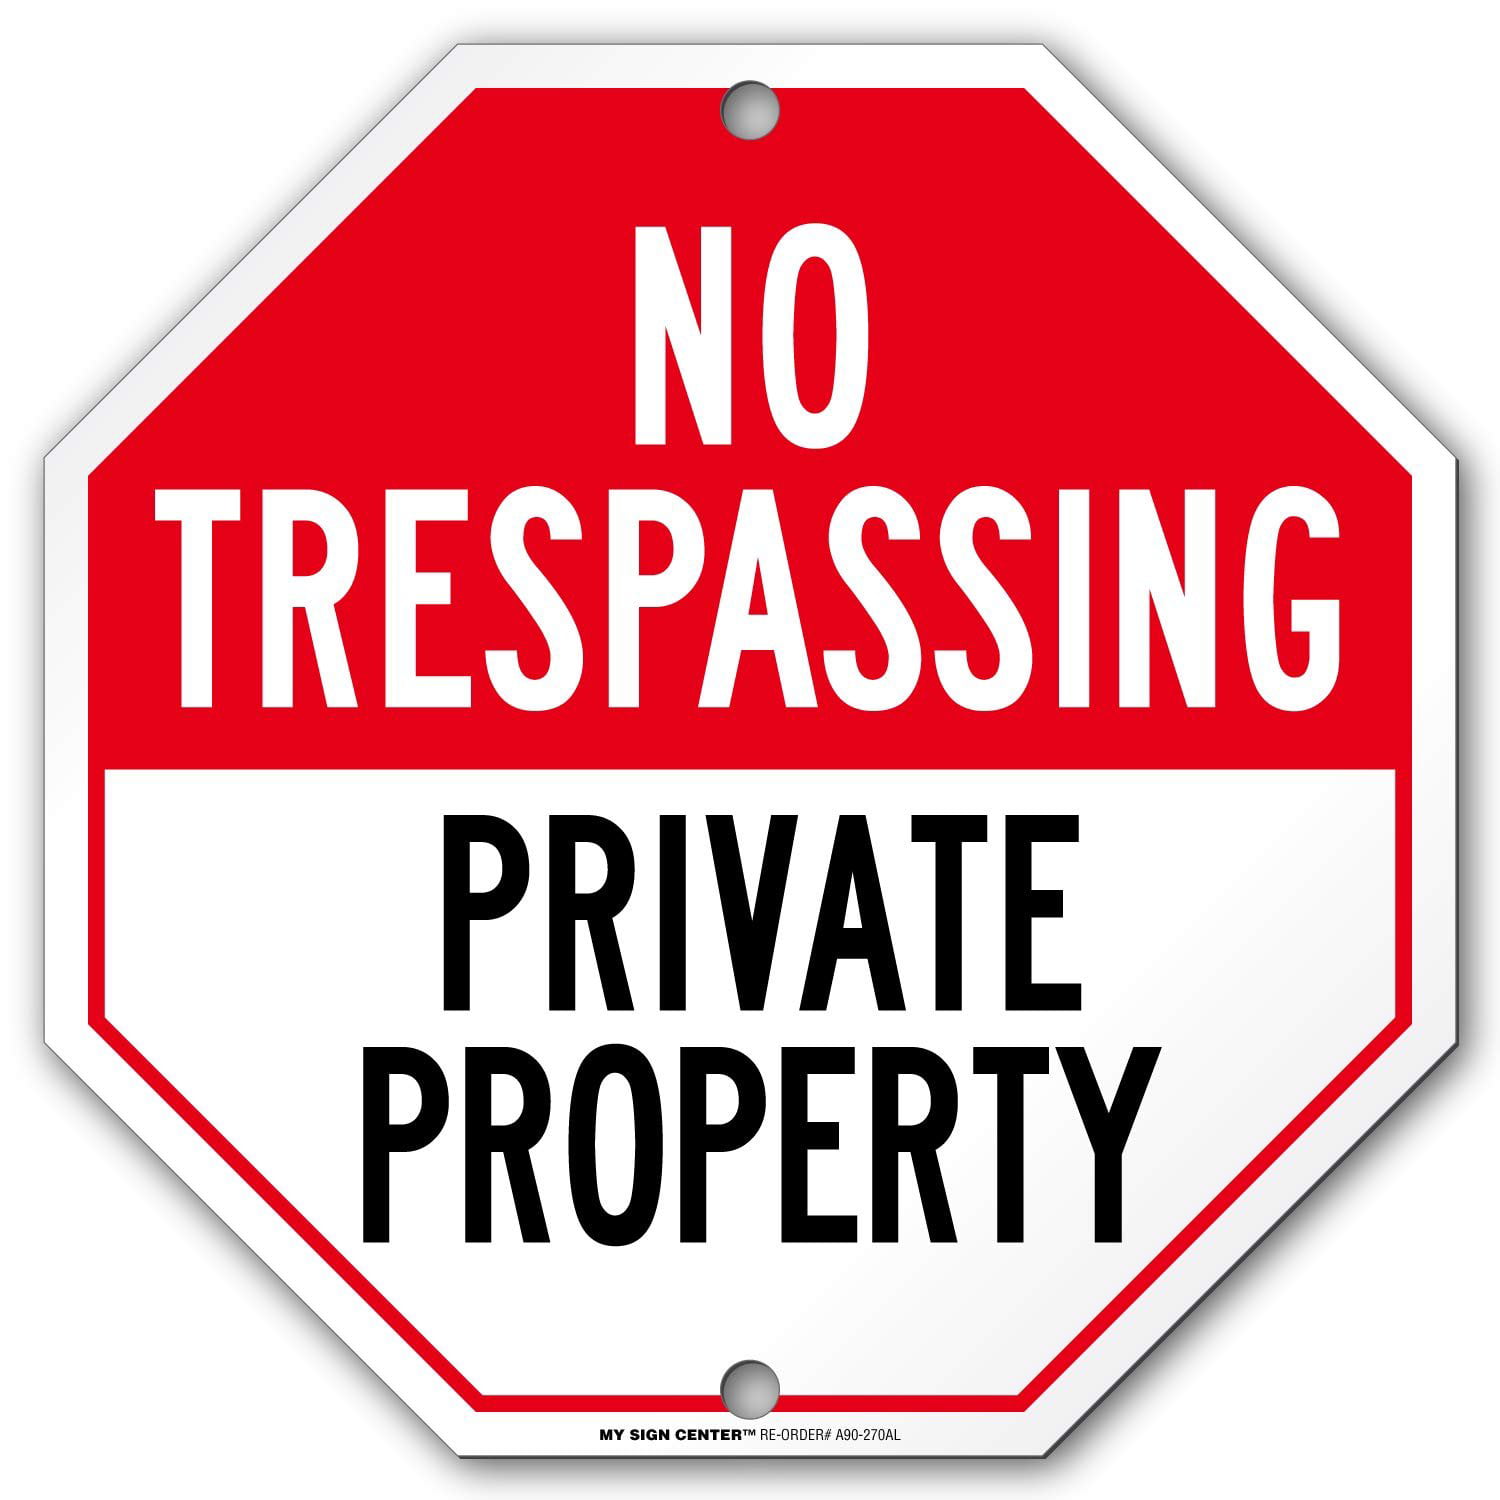 Made In USA Free Body Piercing For Trespassers 8"x12" Metal Plate Parking Sign 